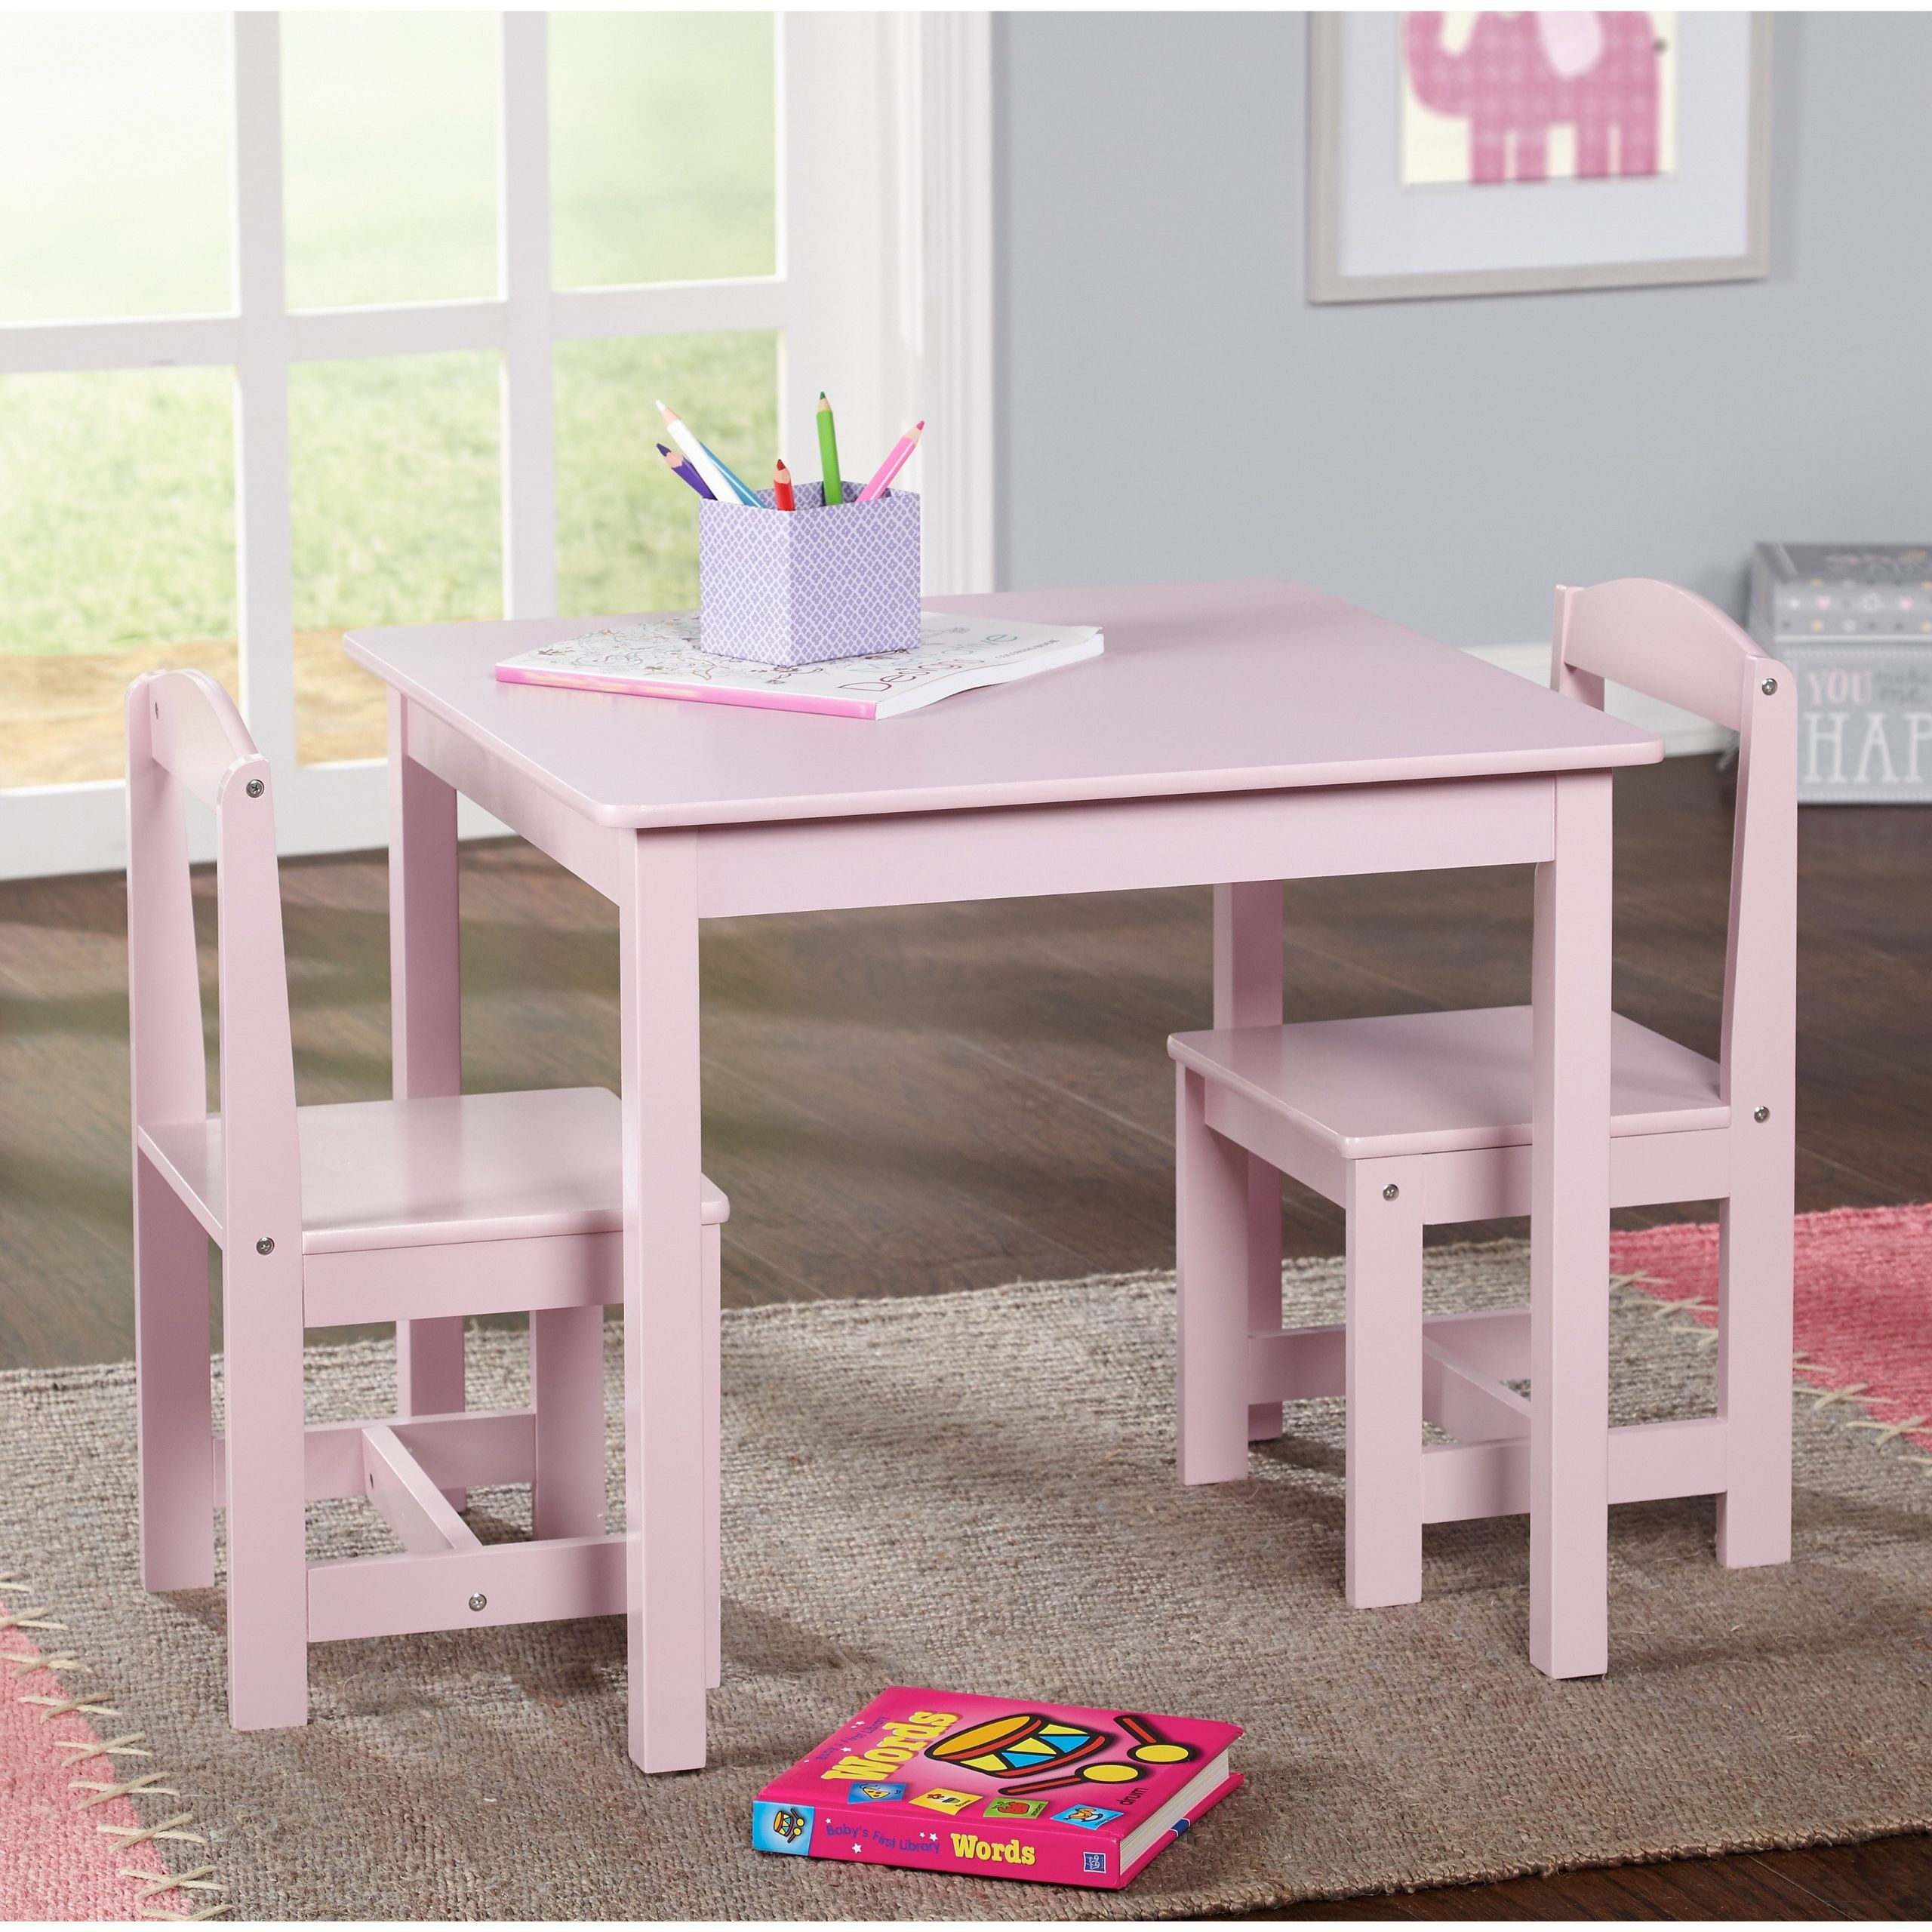 Kids Craft Table
 Kids Craft Table Modern And Chairs Children Activity